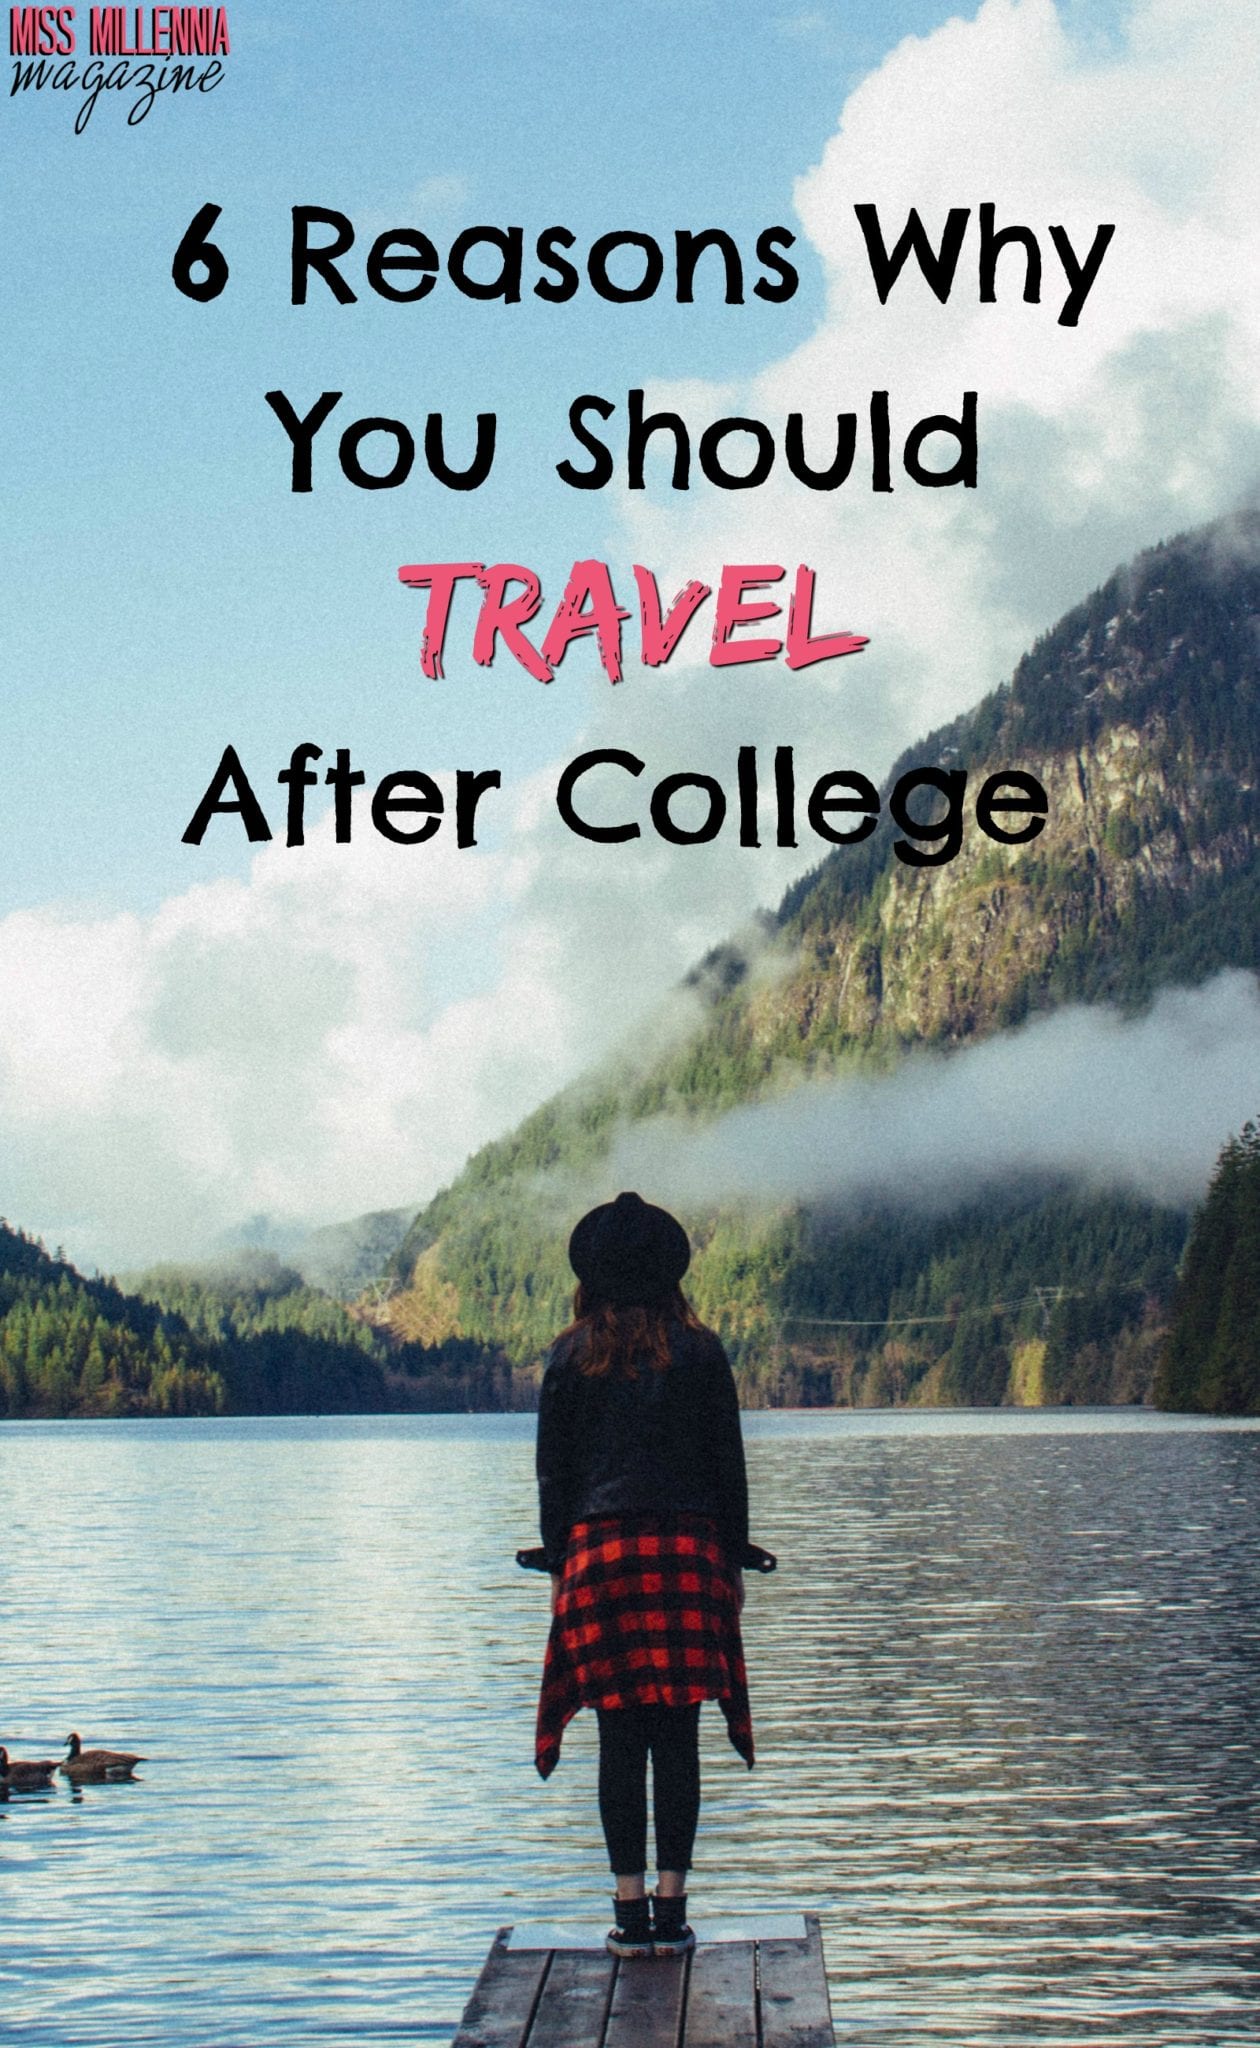 6 Reasons Why You Should Travel After College